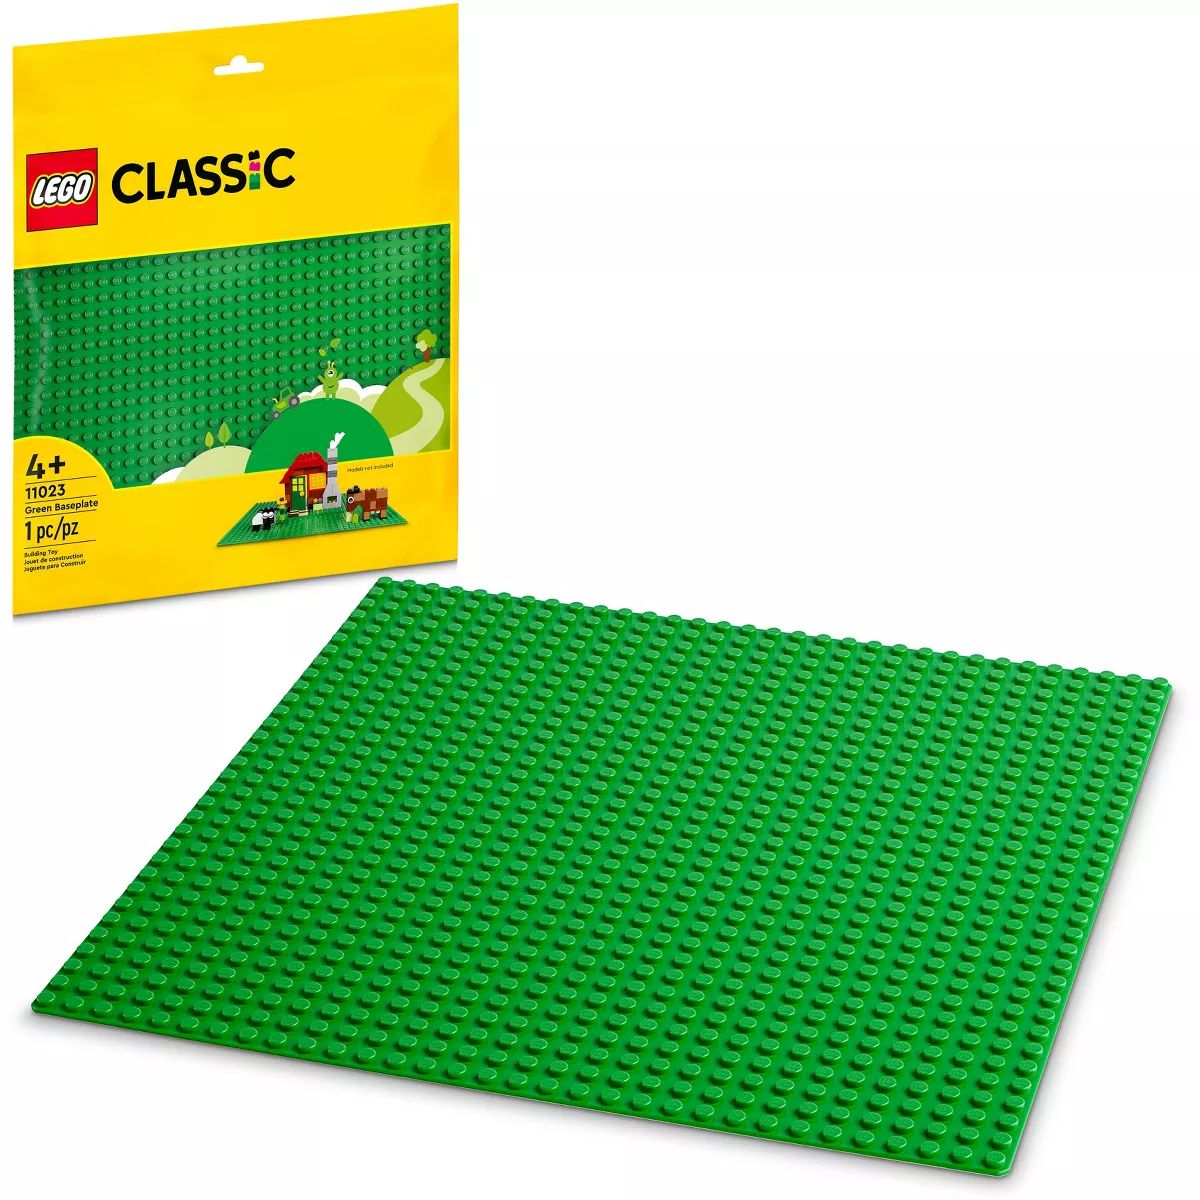 LEGO Classic Green Baseplate 11023 Building Kit | Target